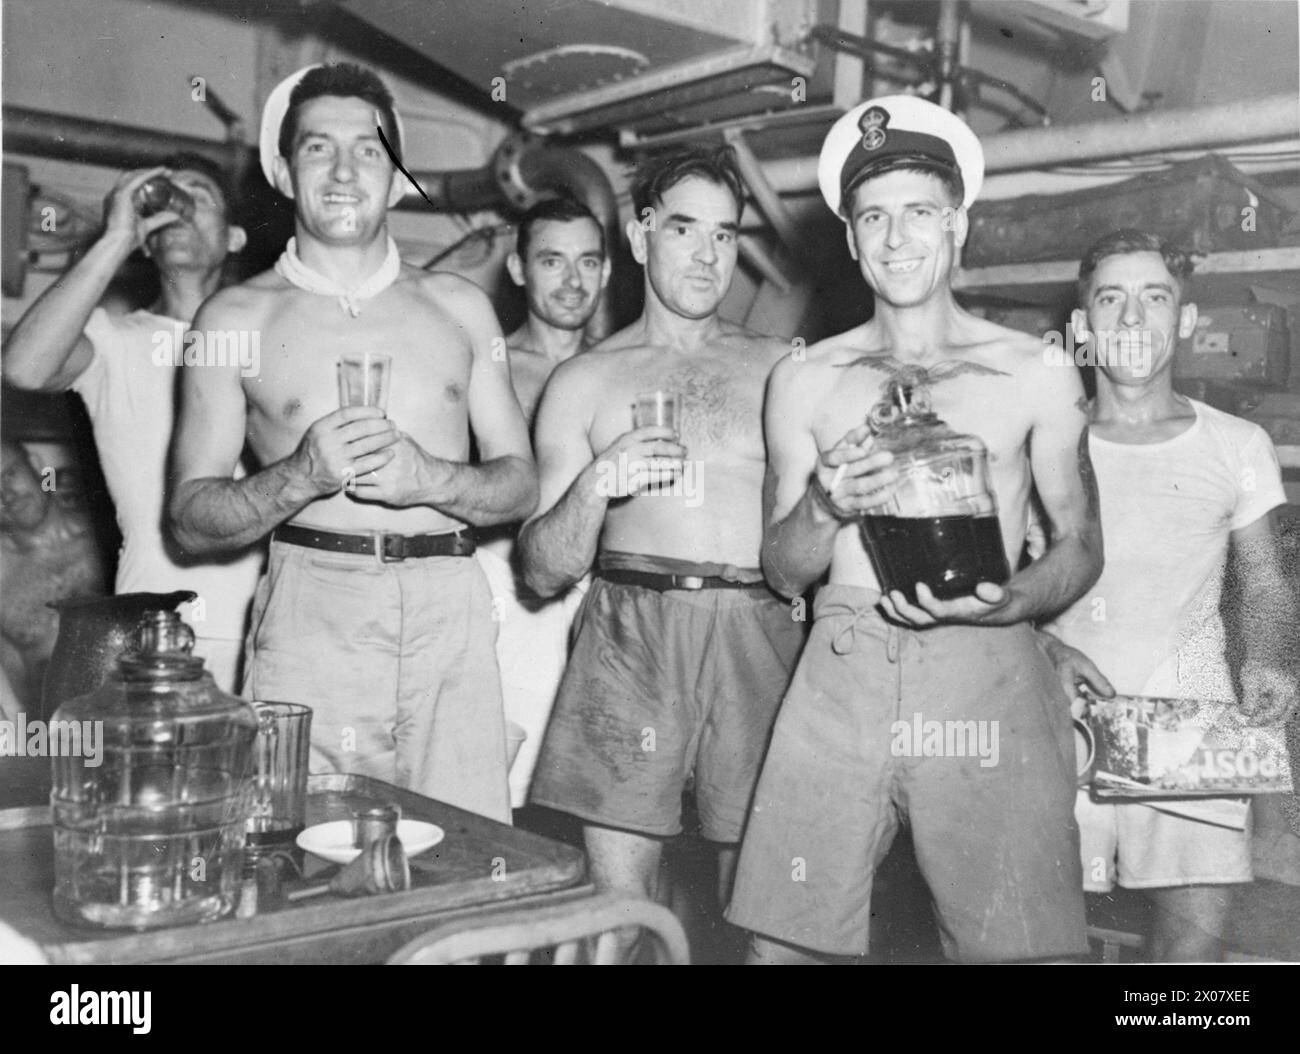 LIBERATED POW'S ON THEIR WAY HOME. 4 SEPTEMBER 1945, ON BOARD THE ESCORT CARRIER HMS SPEAKER AS IT CARRIED HUNDREDS OF BRITISH PRISONERS OF WAR LIBERATED FROM TOKYO CAMPS TO MANILLA, THE FIRST STAGE IN THEIR JOURNEY HOME. - These ex-prisoners of war drink their first tot of rum since 1941. Left to right: PO Leonard Soper, captured in HMS TAMAR when Hong Kong fell on Christmas 1941; PO Callohane, of Skibbereen, Eire; Yeoman Frederick Mitchell of Newcastle-under-Lyme, Staffs; PO Geoffrey Josey, of Newbury, Berkshire; and PO William Mitchell of Milton, Southsea, Hants Stock Photo